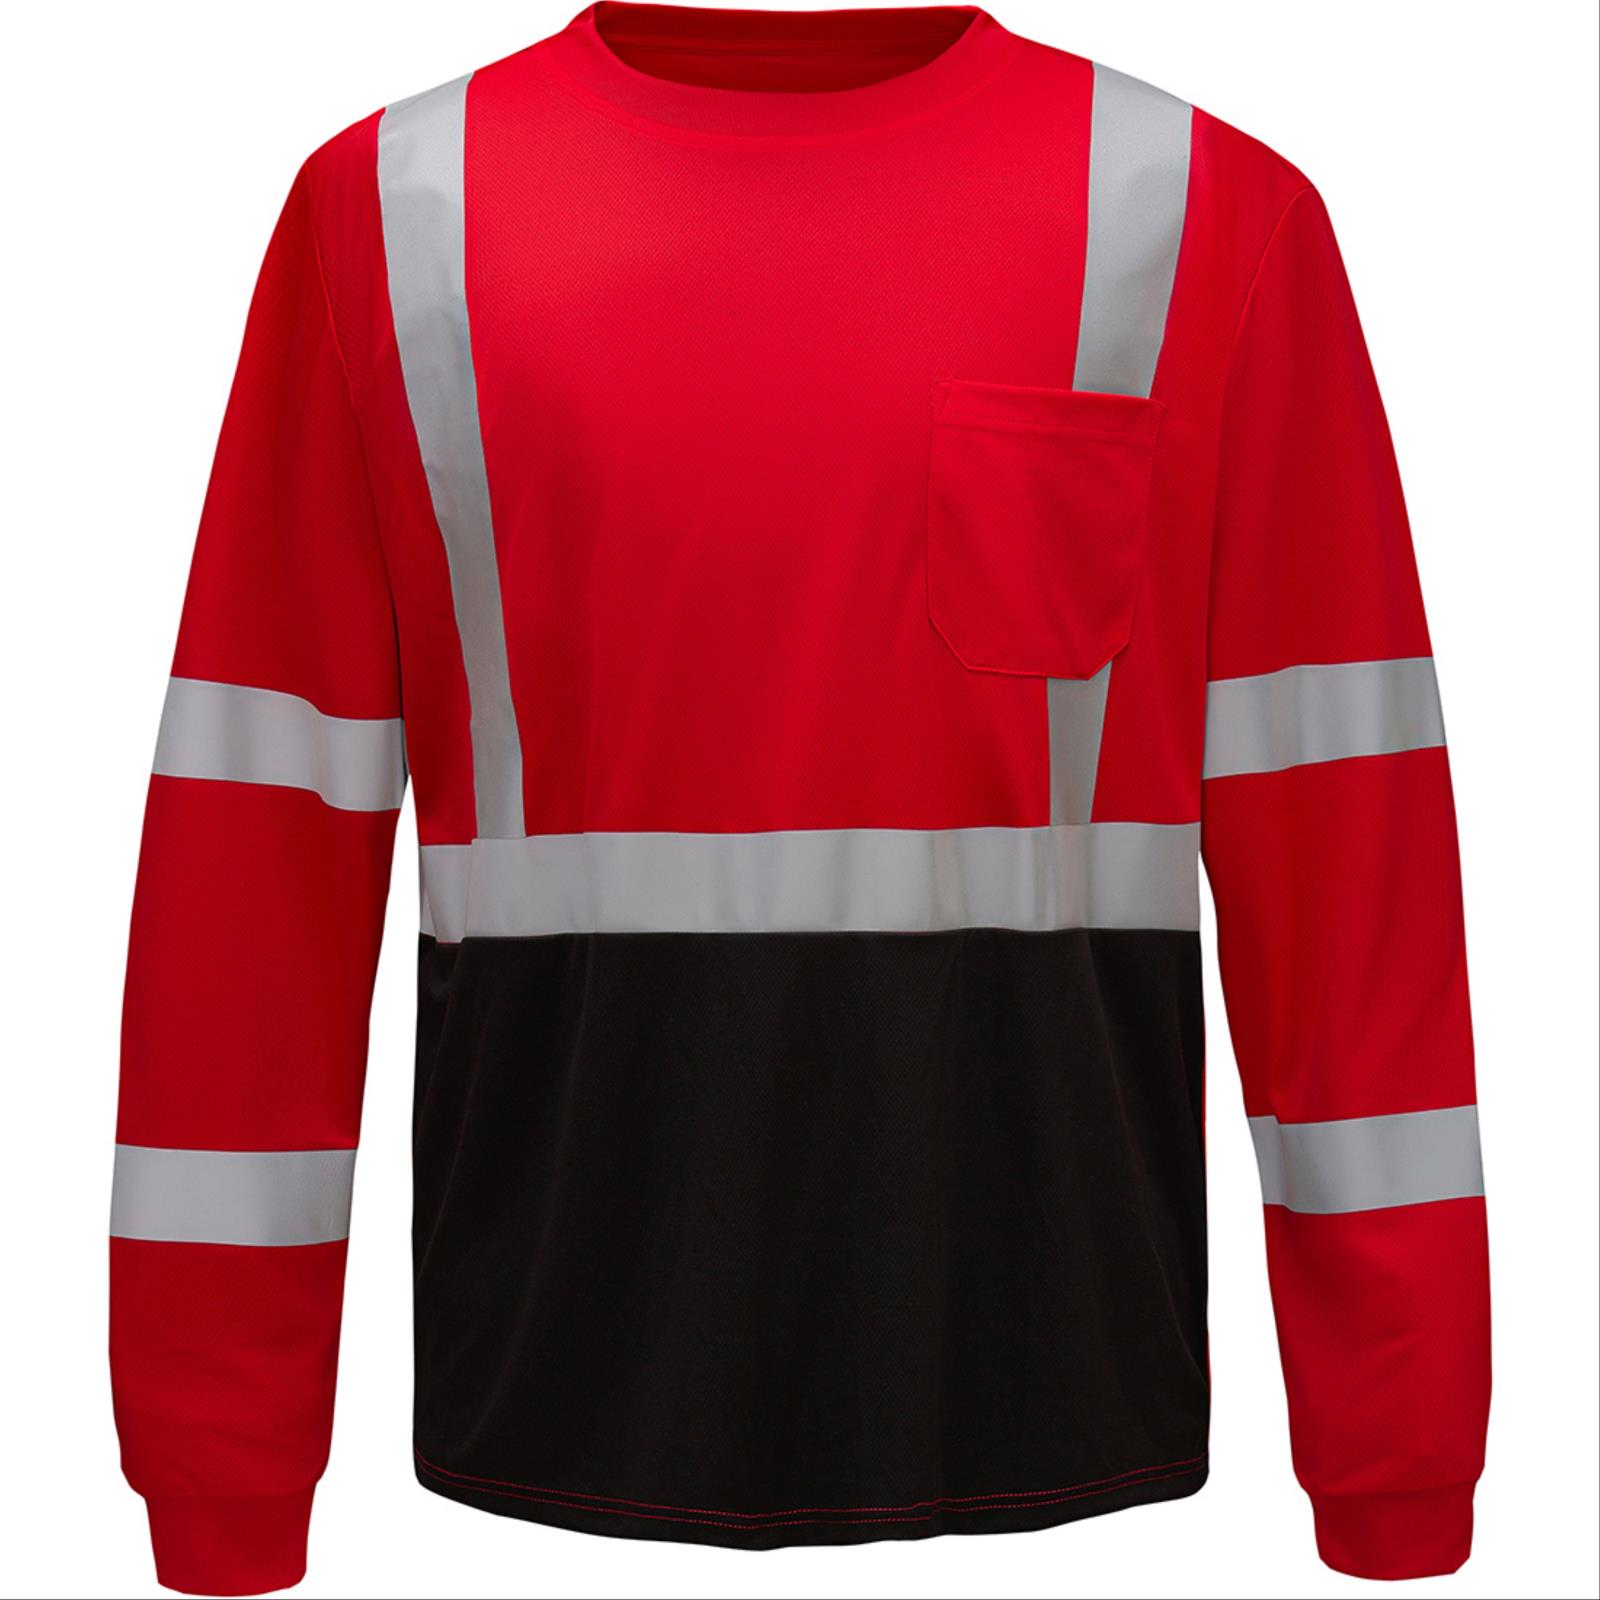 Safety Products Inc - Long Sleeve Shirt with Reflective Tape